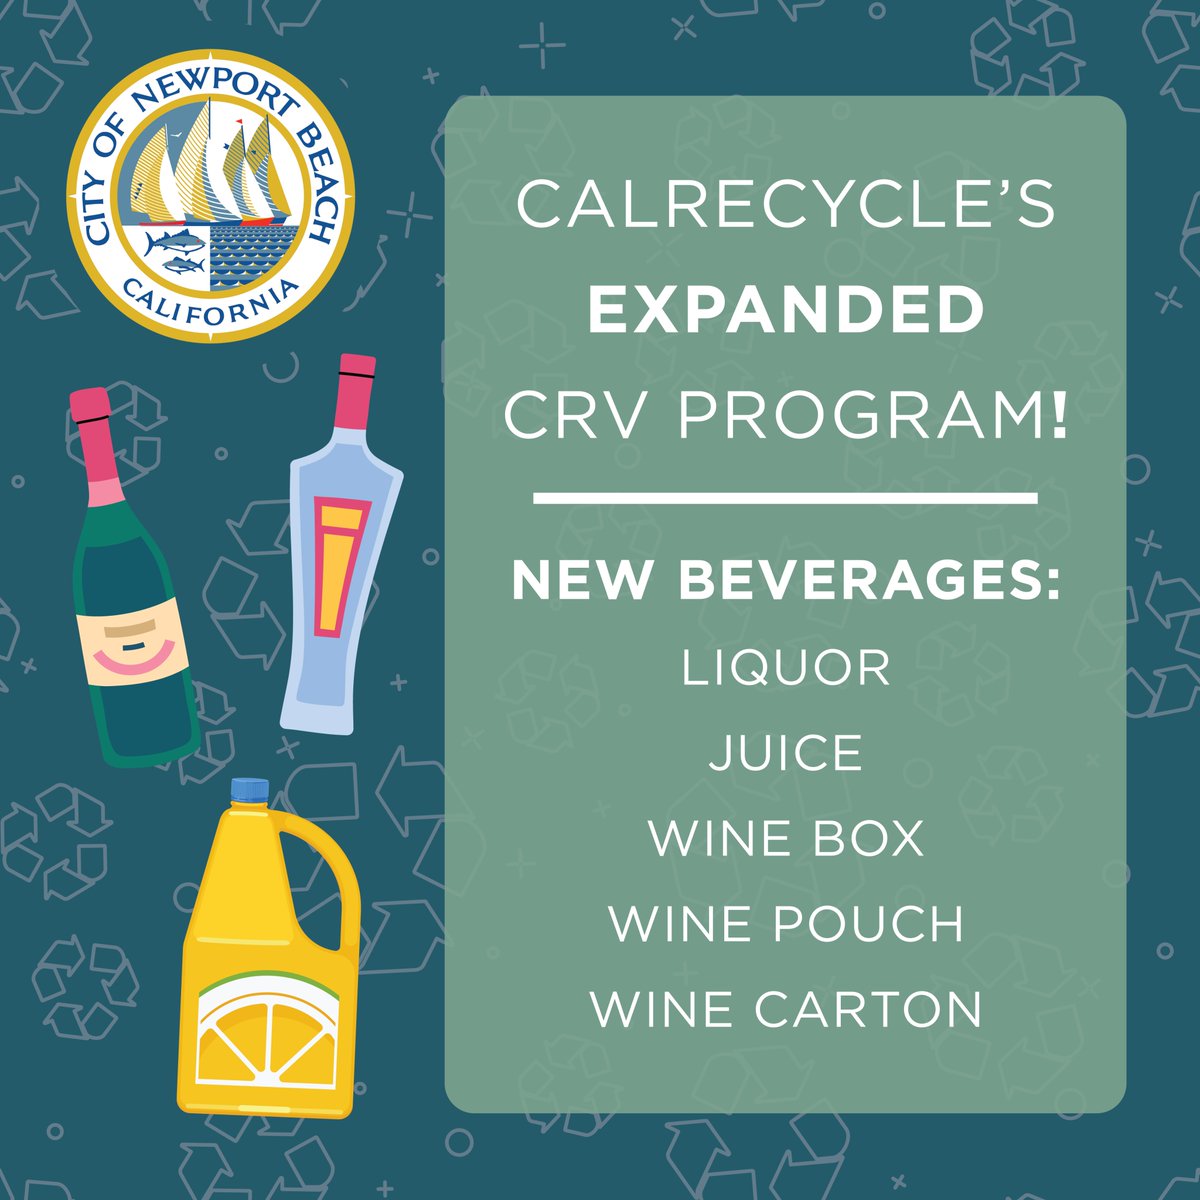 Exciting news! Starting Jan 1, 2024, CA expanded its @CalRecycle's Beverage Container Recycling Program! Now, recycle even more—liquor, juice, wine boxes, pouches, and cartons. Let's make a difference together! #NBRecycles